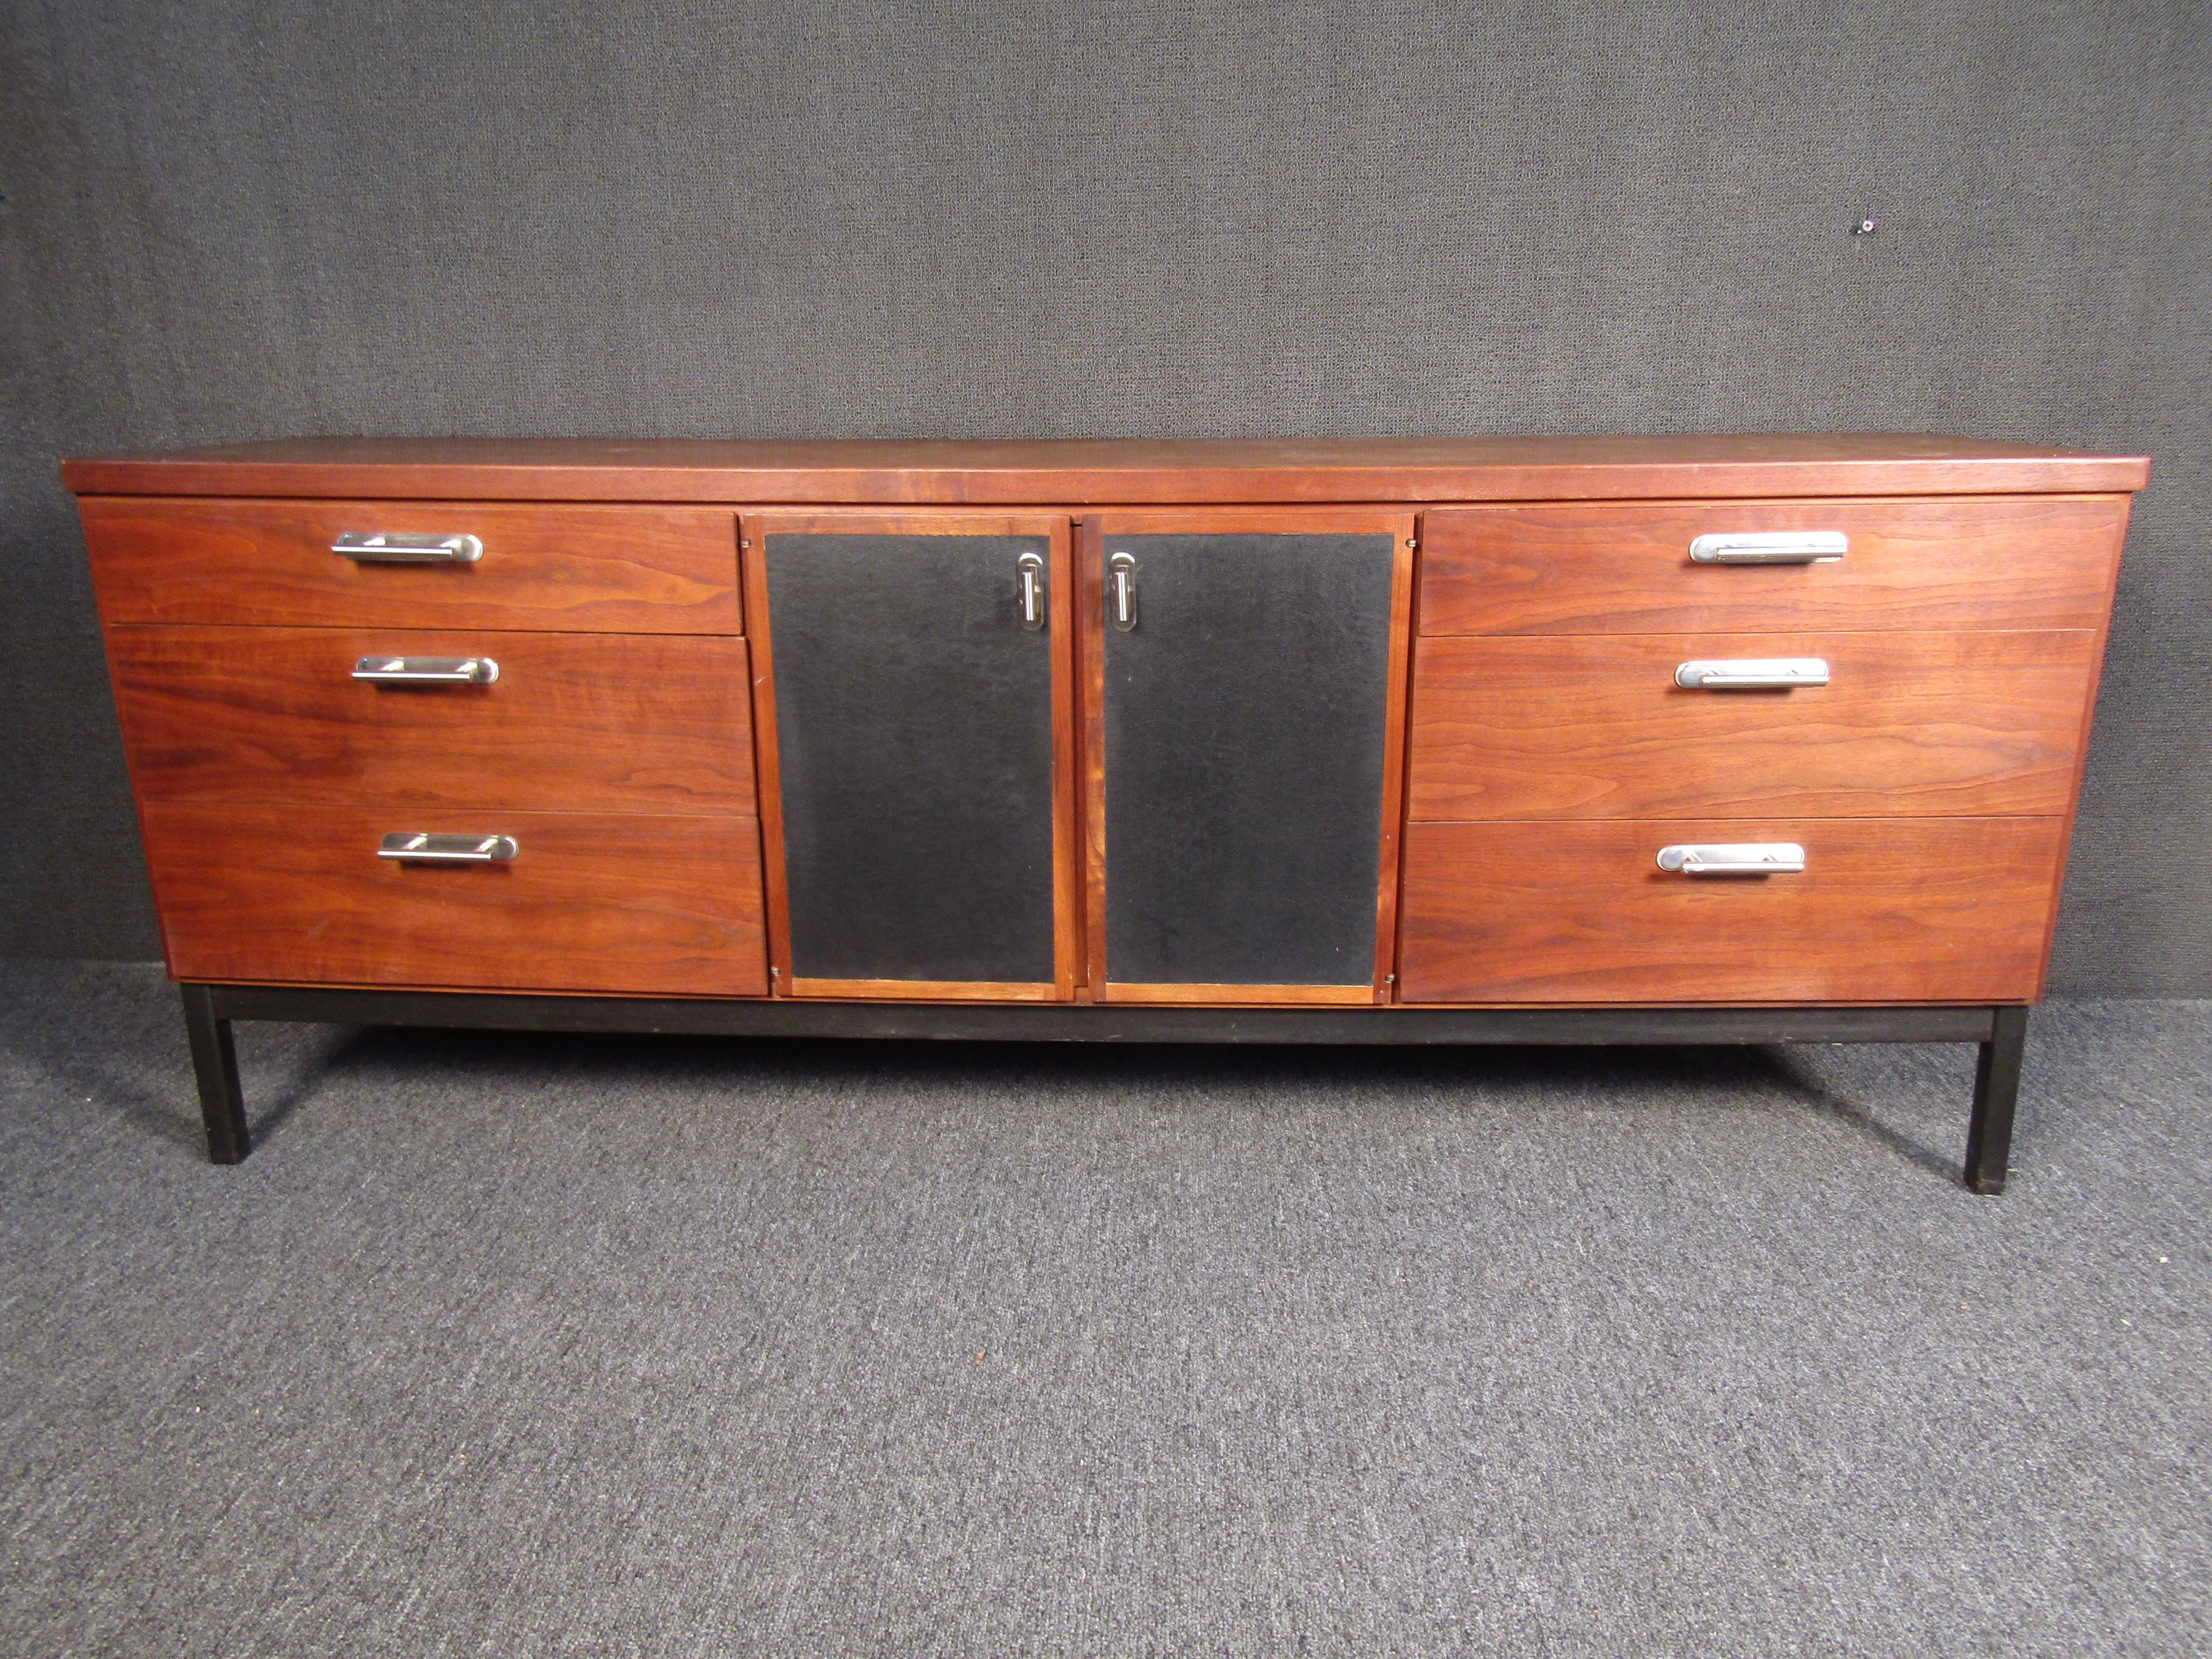 Vintage credenza that combines walnut woodgrain with chrome accents for a stunning Mid-Century Modern look. Plenty of storage is offered between six drawers on either side and an additional three drawers inside the middle compartment. Black paneled